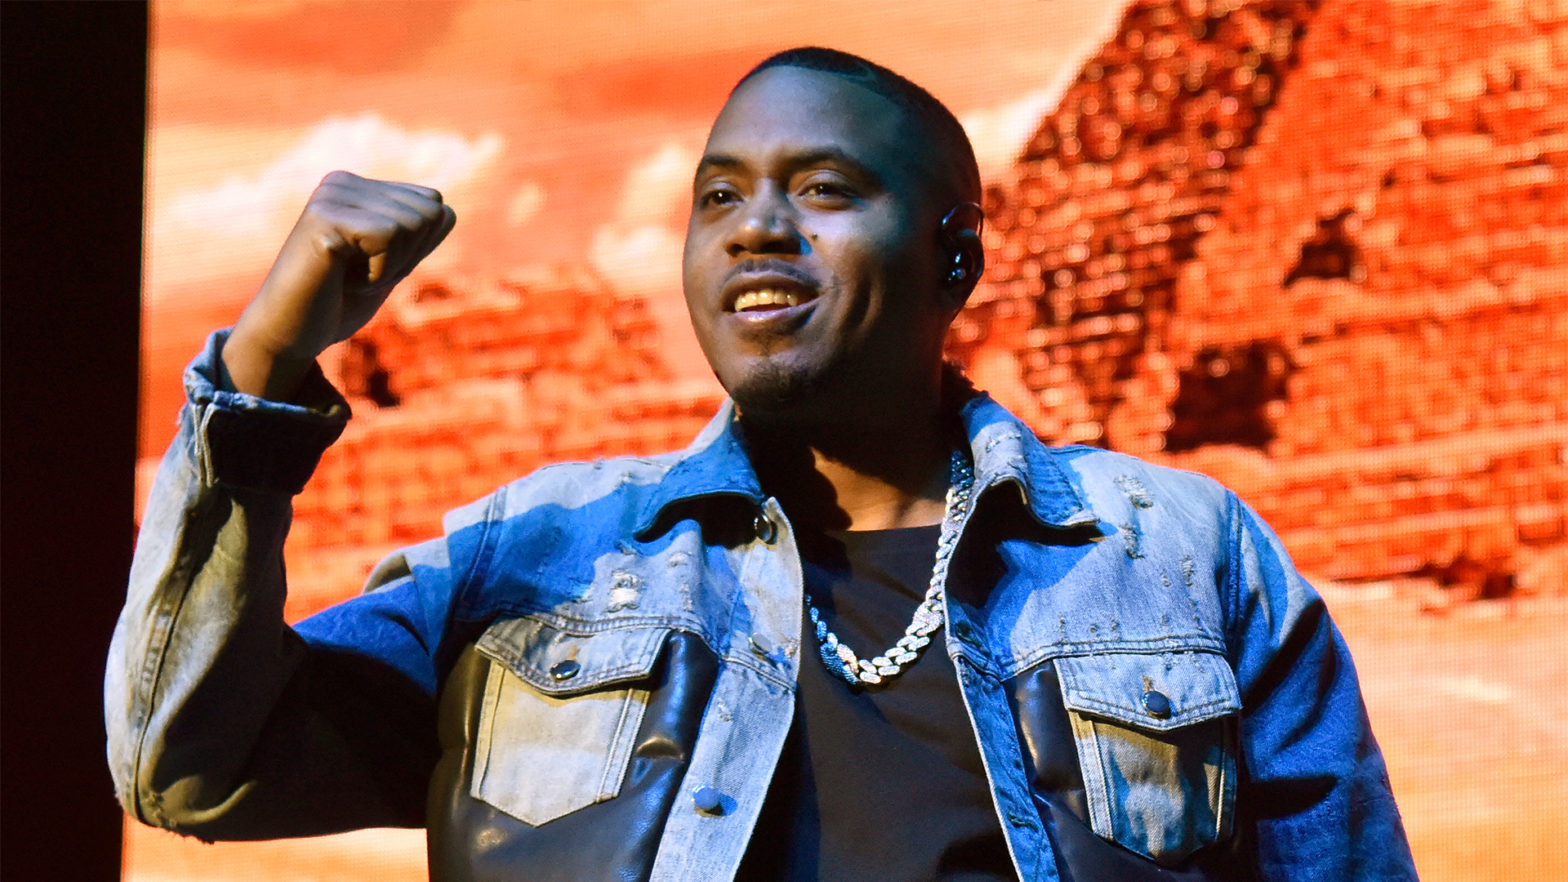 You'll Soon Be Able To Have Streaming Royalty Rights To Two Of Nas’ Tracks